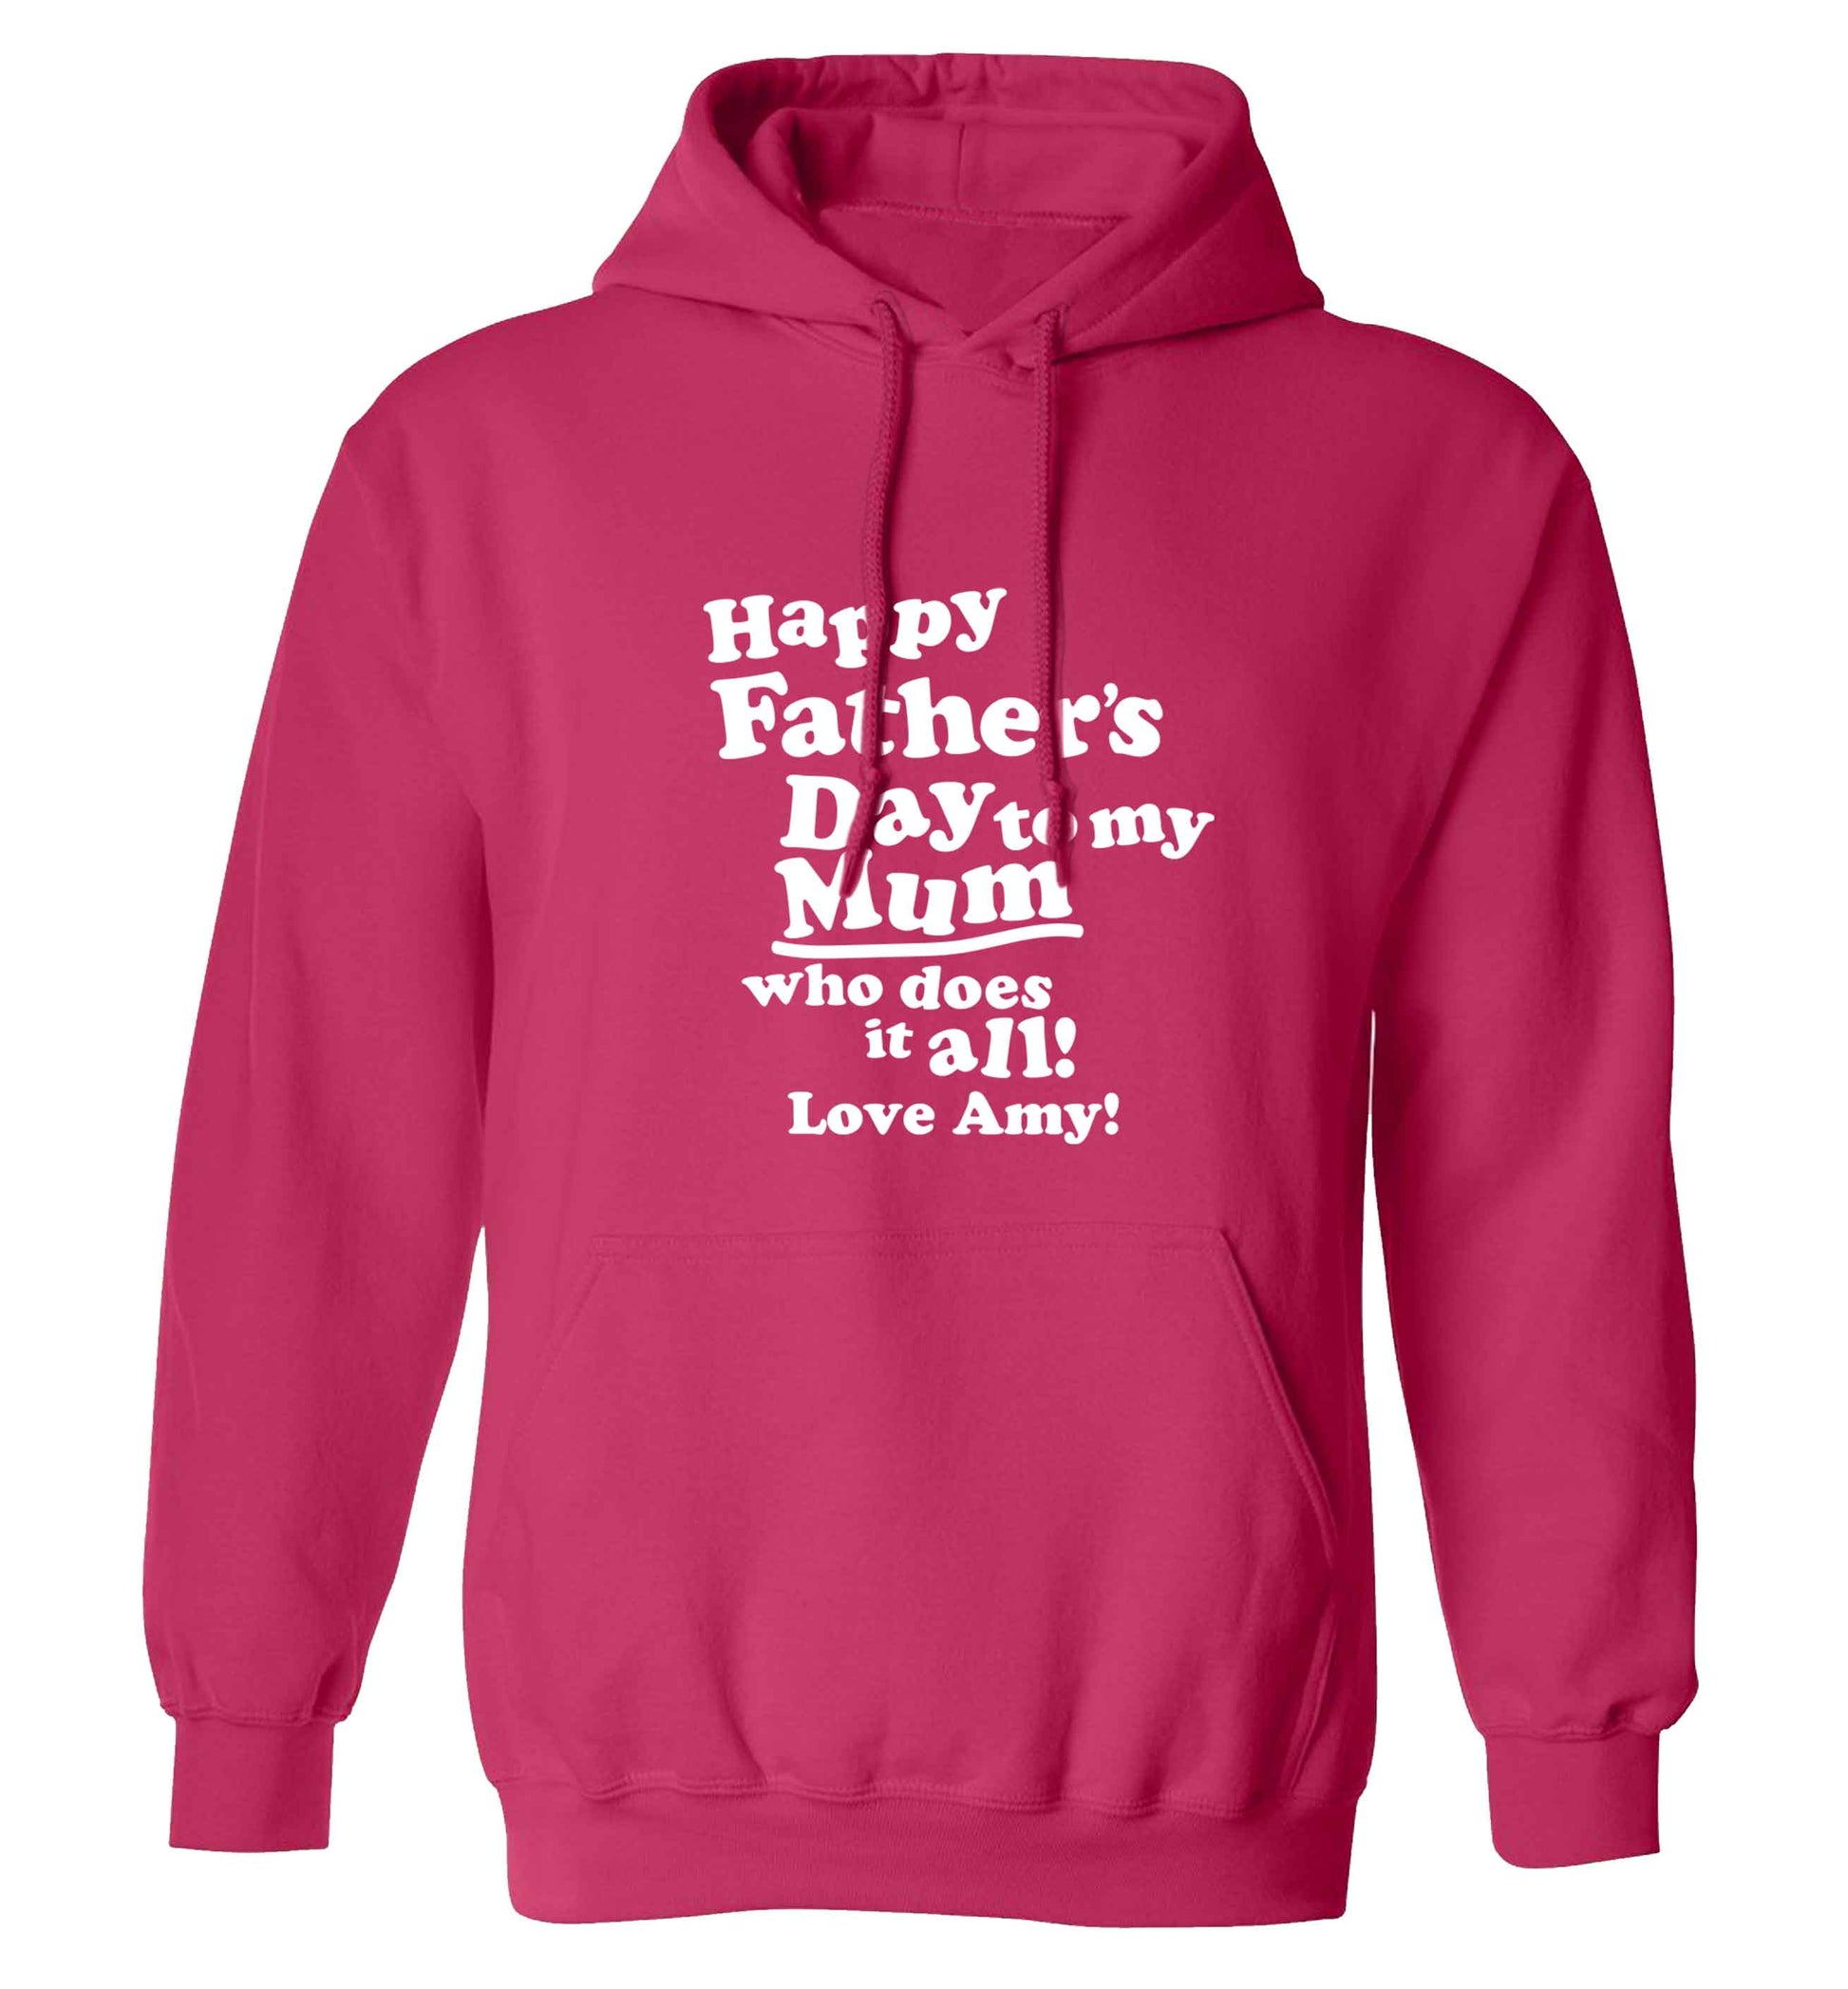 Happy Father's day to my mum who does it all adults unisex pink hoodie 2XL